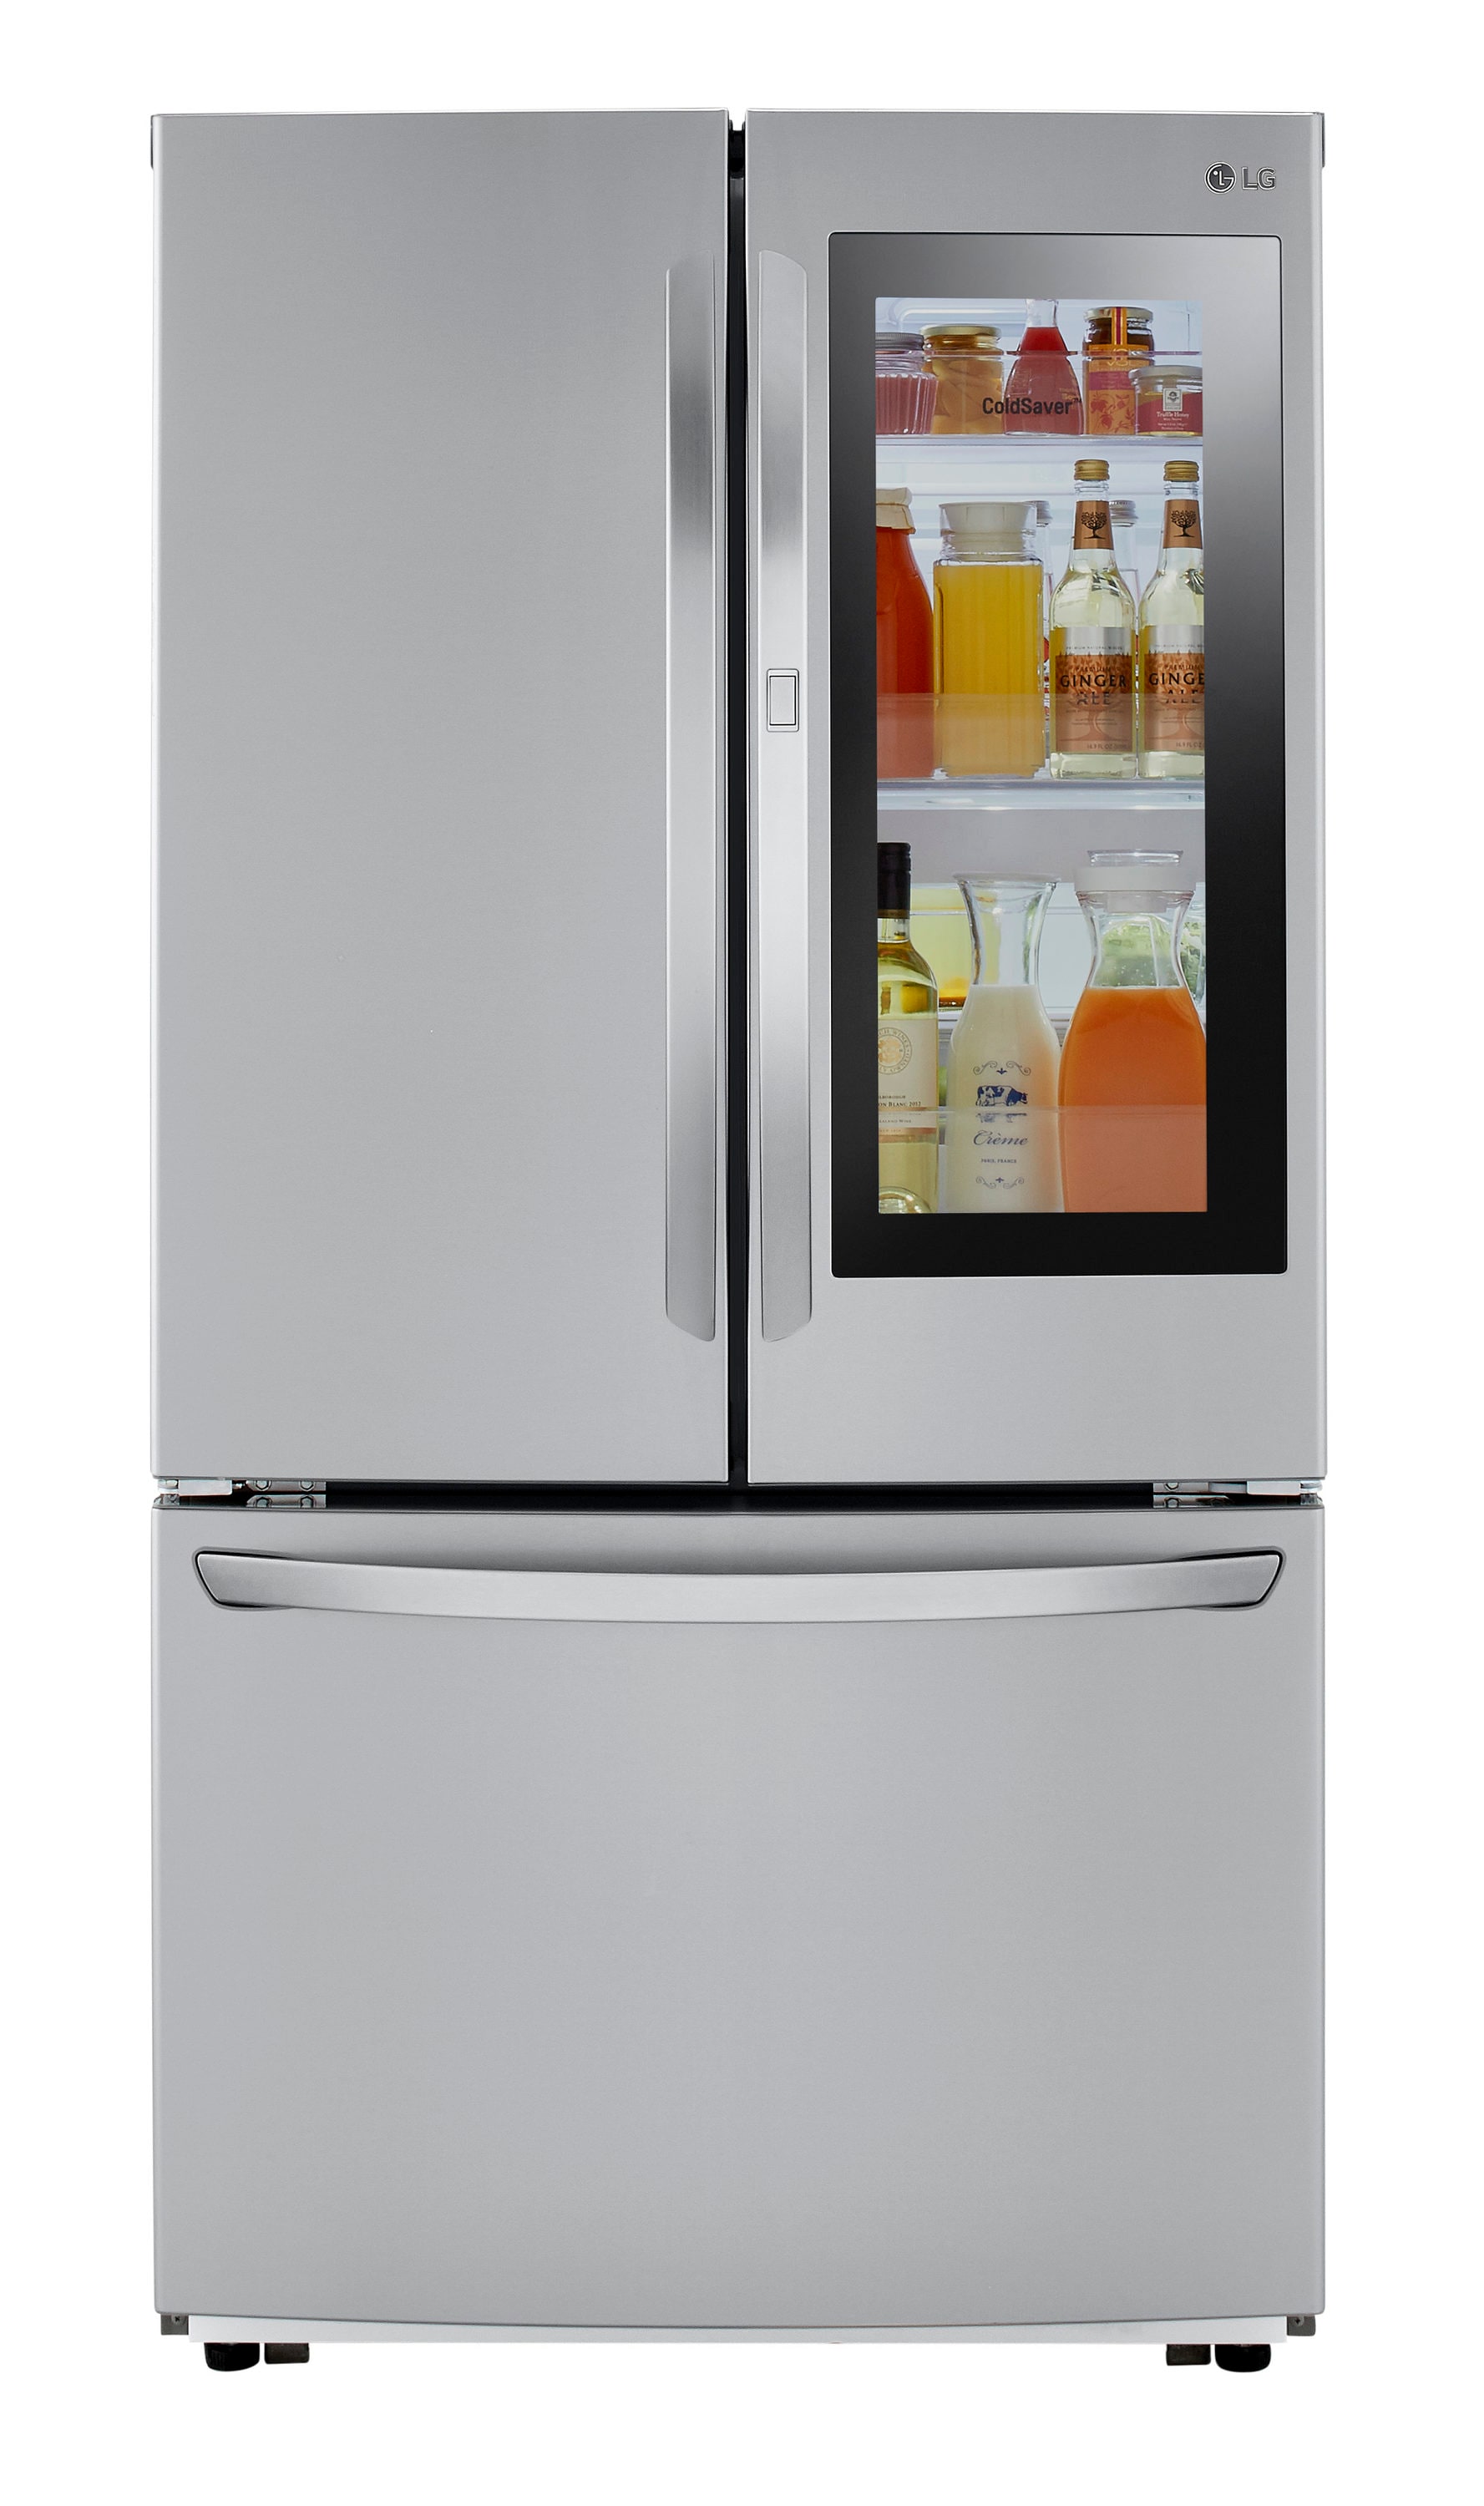 Fridge Wrap Refrigerator Vinyl Mural Removable Sticker Peel and Stick Side  by Side French Door SKU 110 